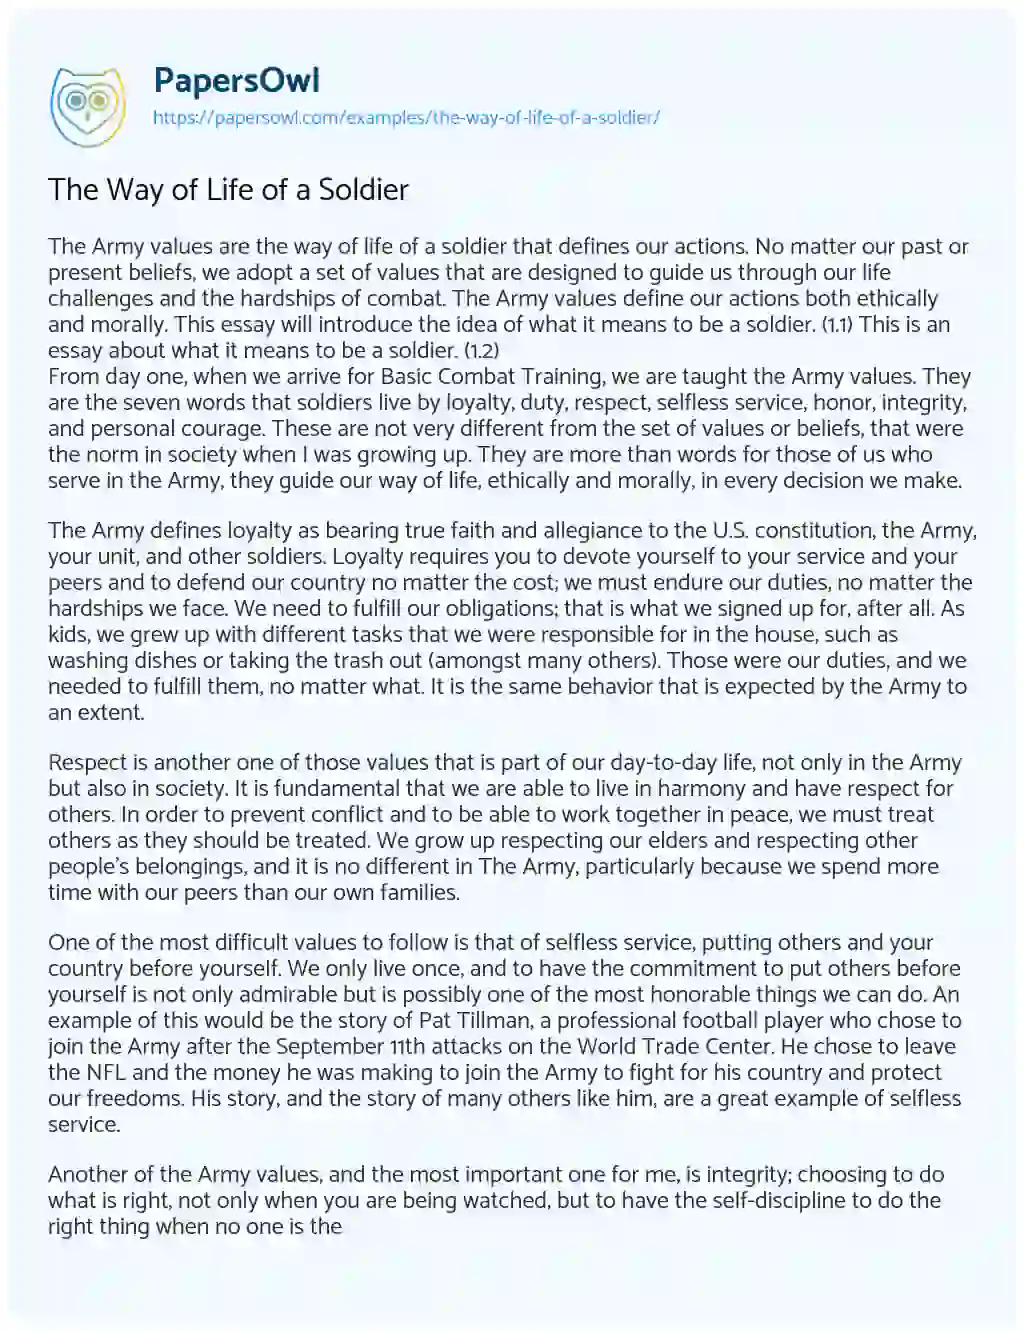 The Way of Life of a Soldier essay